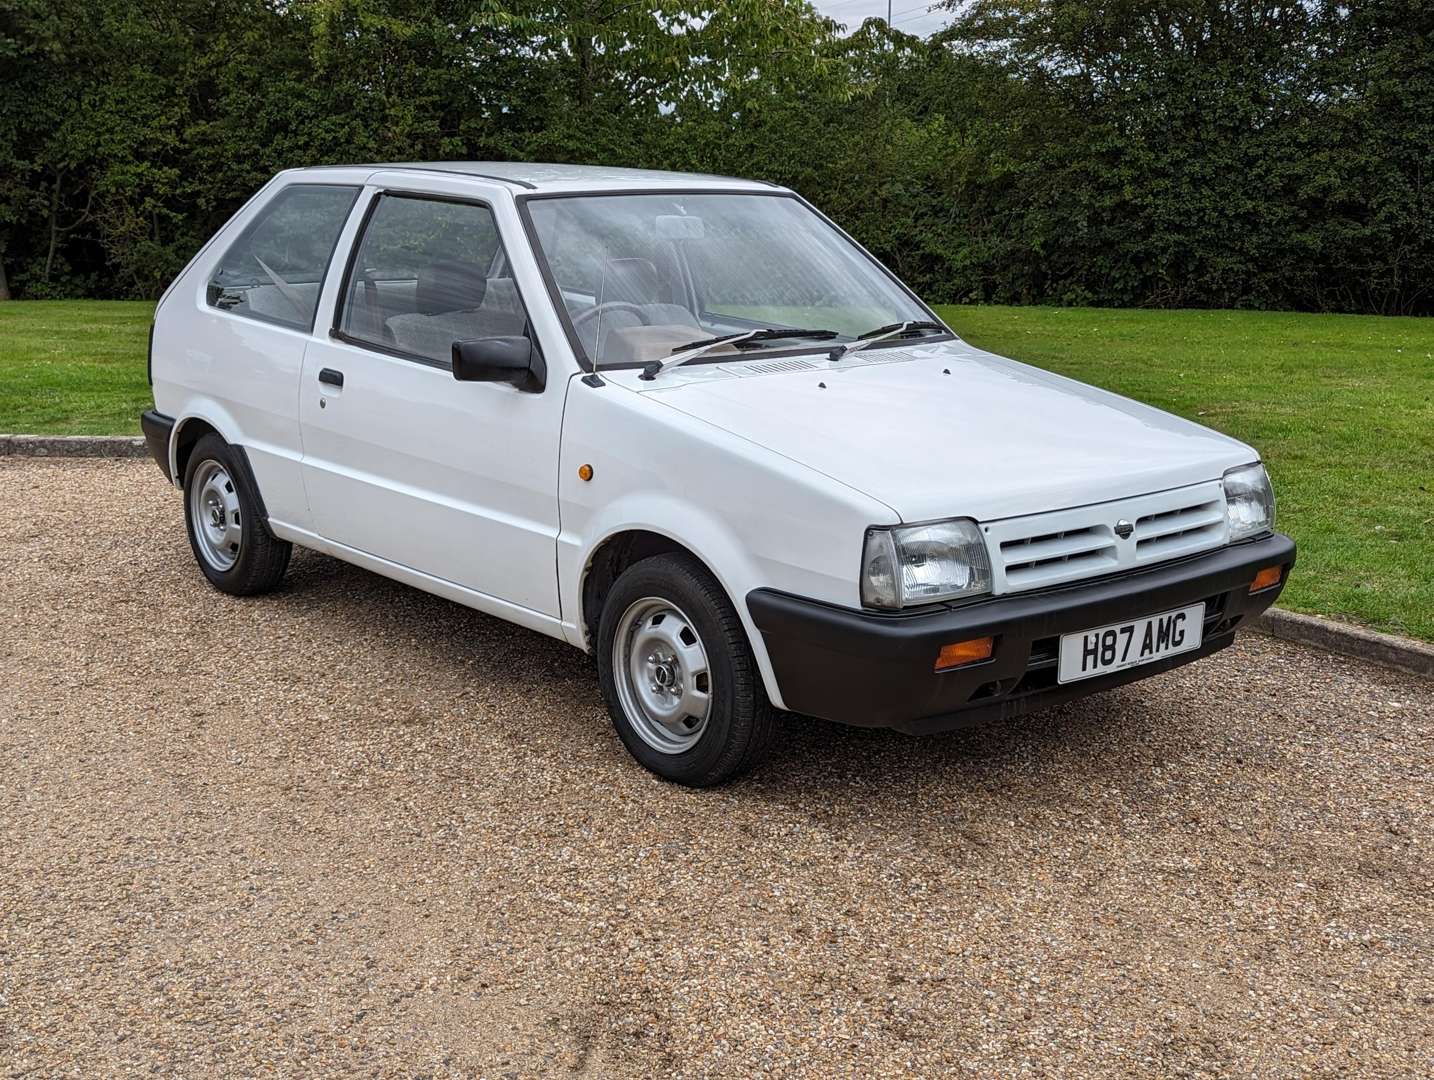 1990 NISSAN MICRA 1.0 LS. 1 OWNER FROM NEW, Saturday 19th & Sunday 20th  August